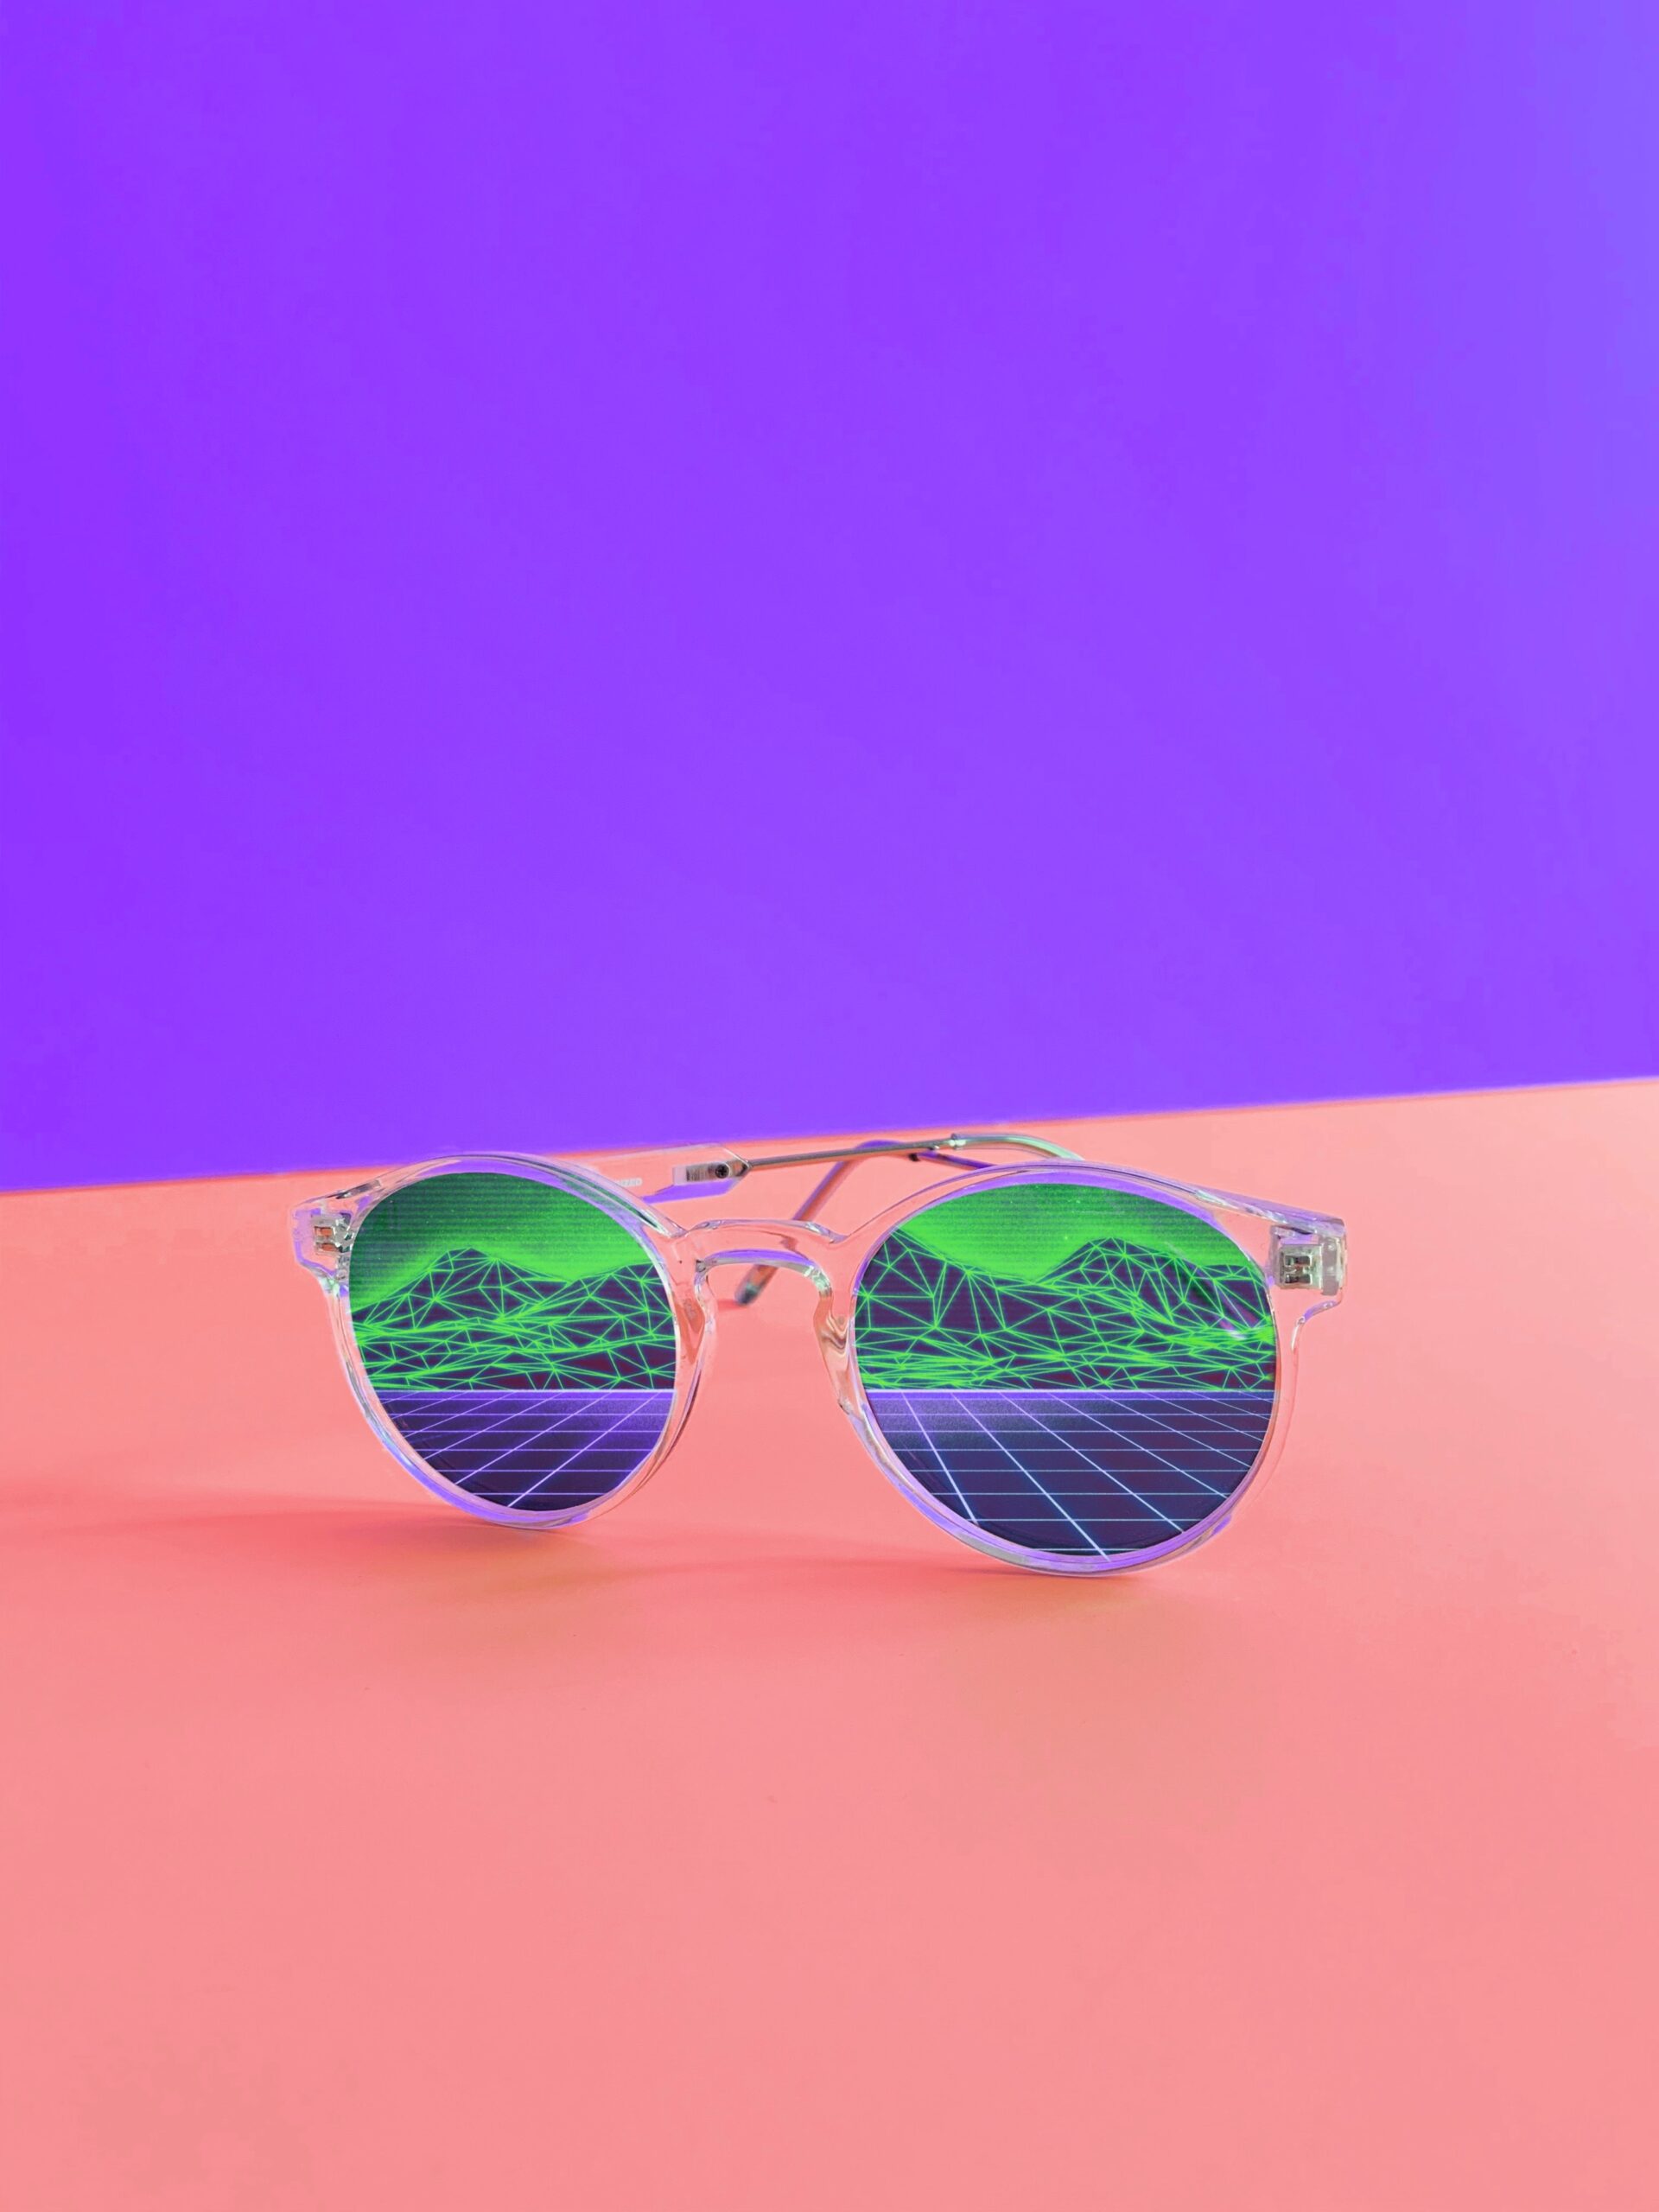 Sunglasses with a 3D reflection on a pink and purple background